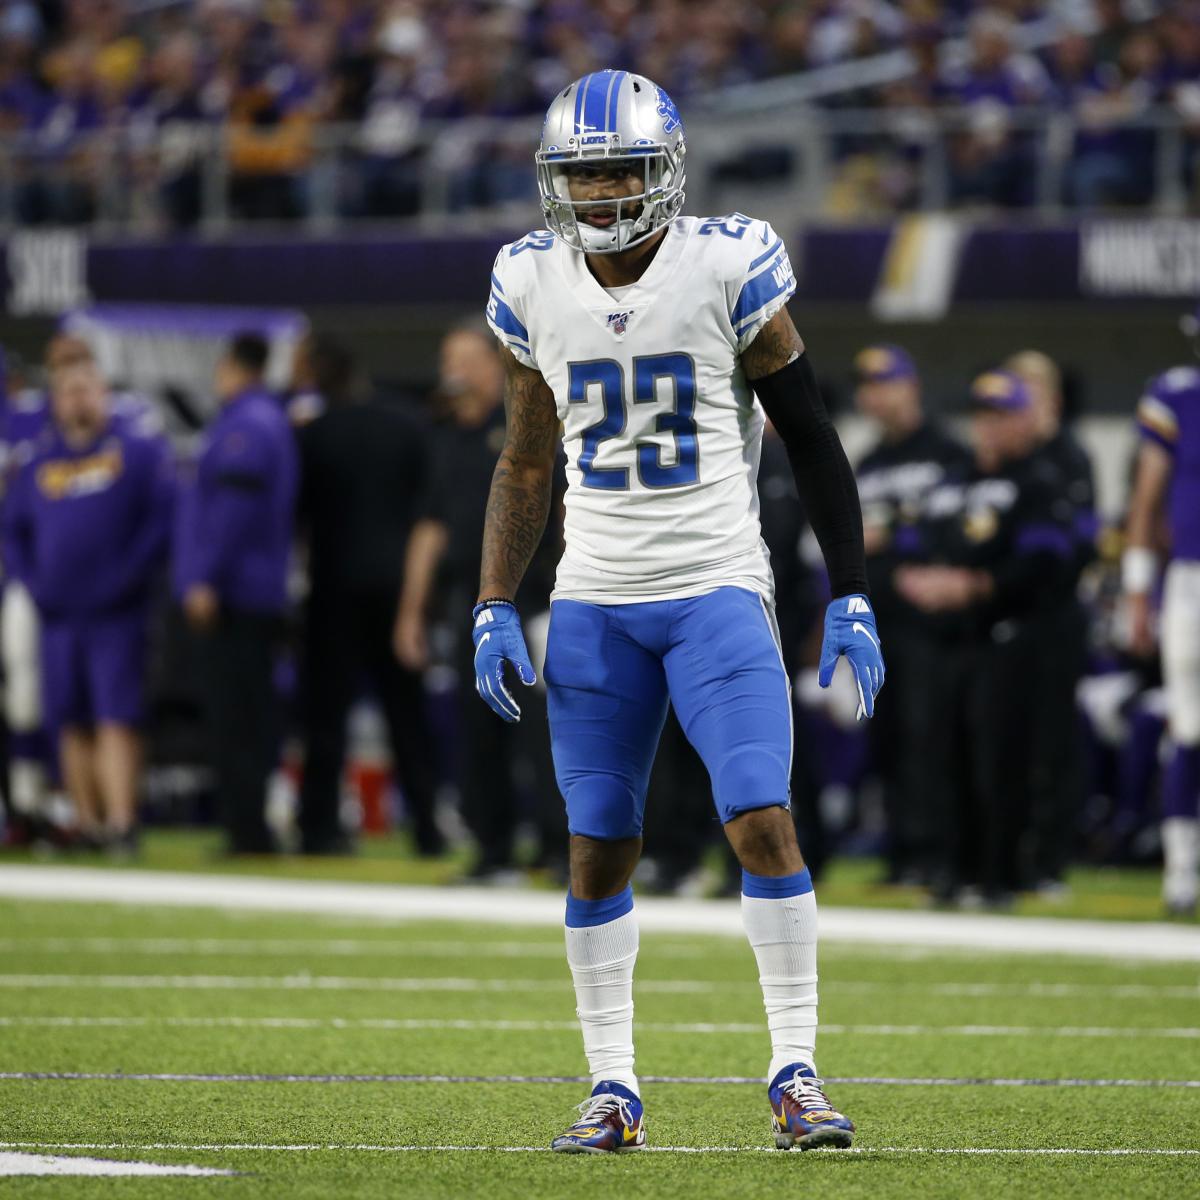 Darius Slay to wear jersey No. 24 in honor of the late Kobe Bryant